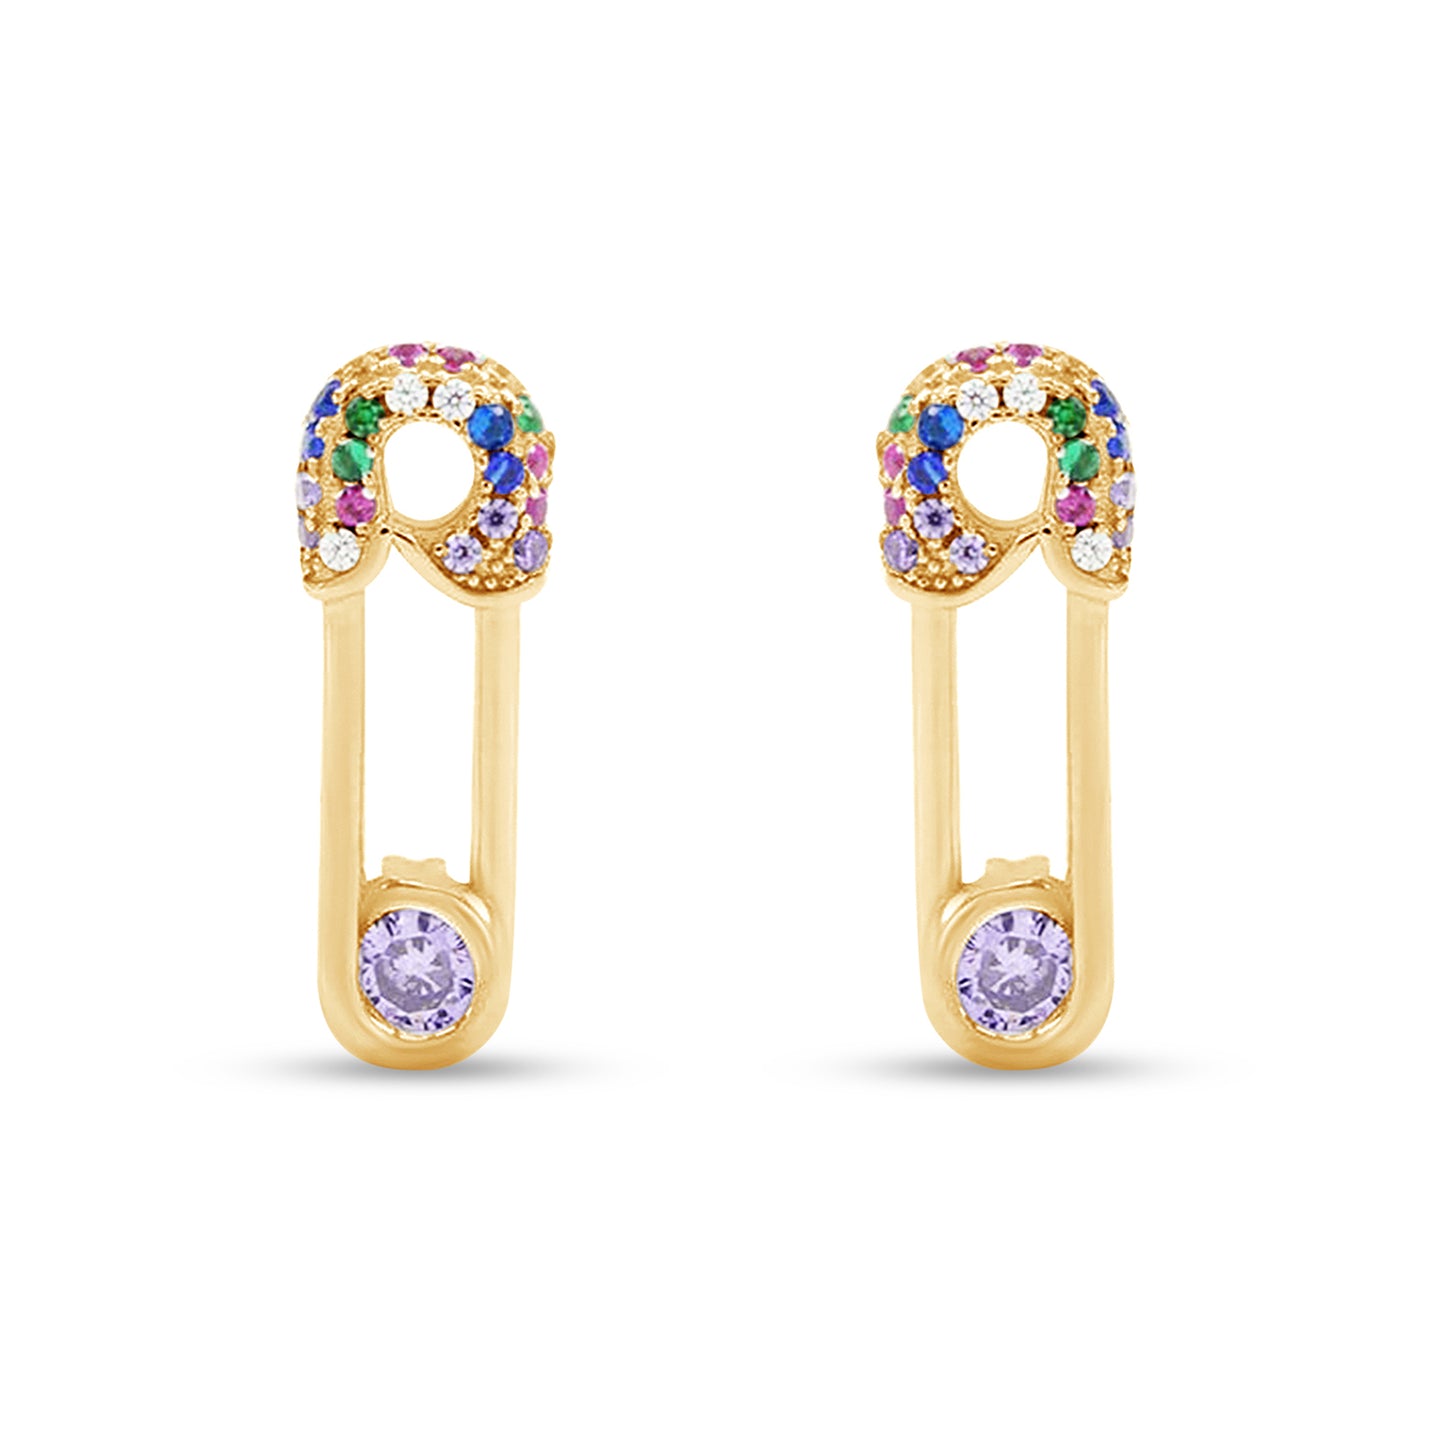 Colourful Rainbow Cubic Zirconia Tiny Dainty Safety Pin Stud Earrings For Women In 14K Gold Plated 925 Sterling Silver